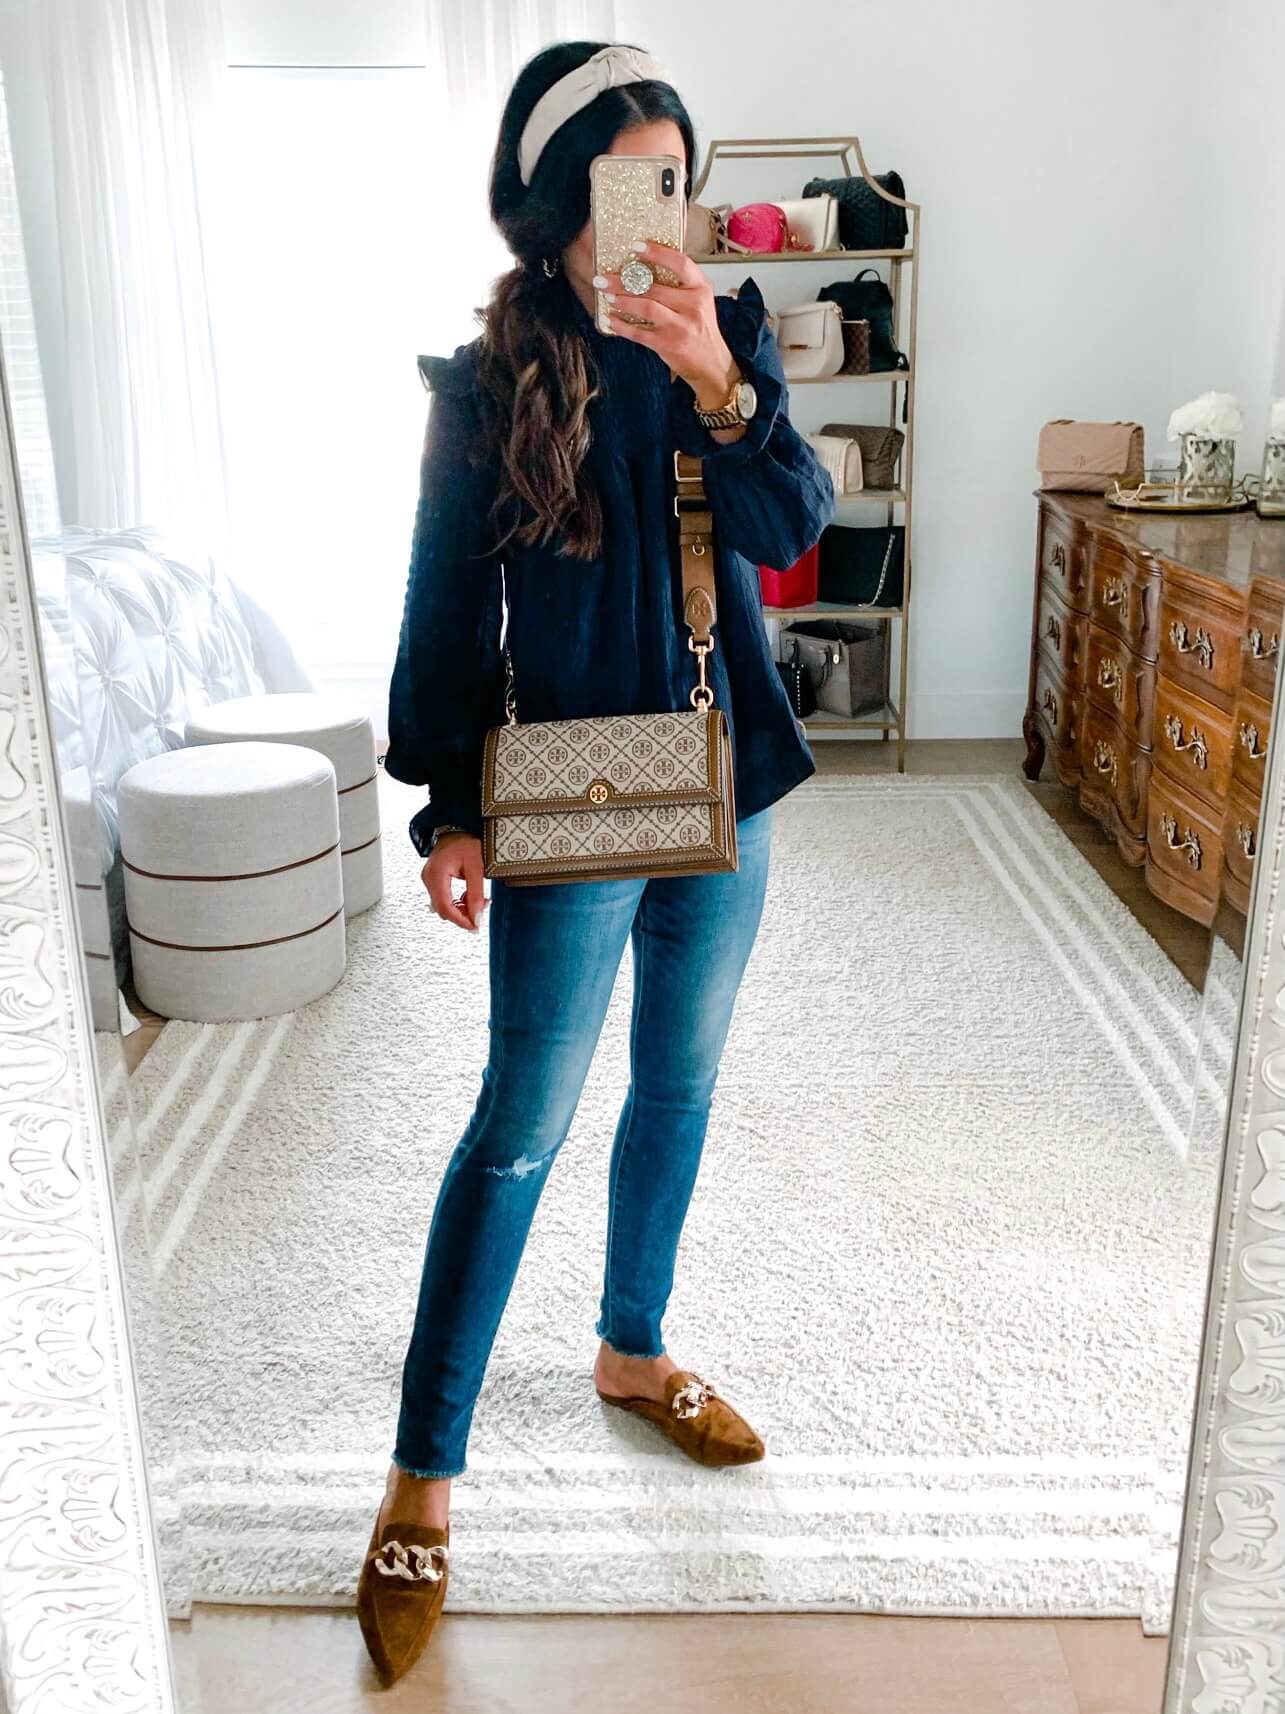 Fall Outfits & Tory Burch Bag Try On + Giftcard Promo Ends Tonight! - The  Double Take Girls